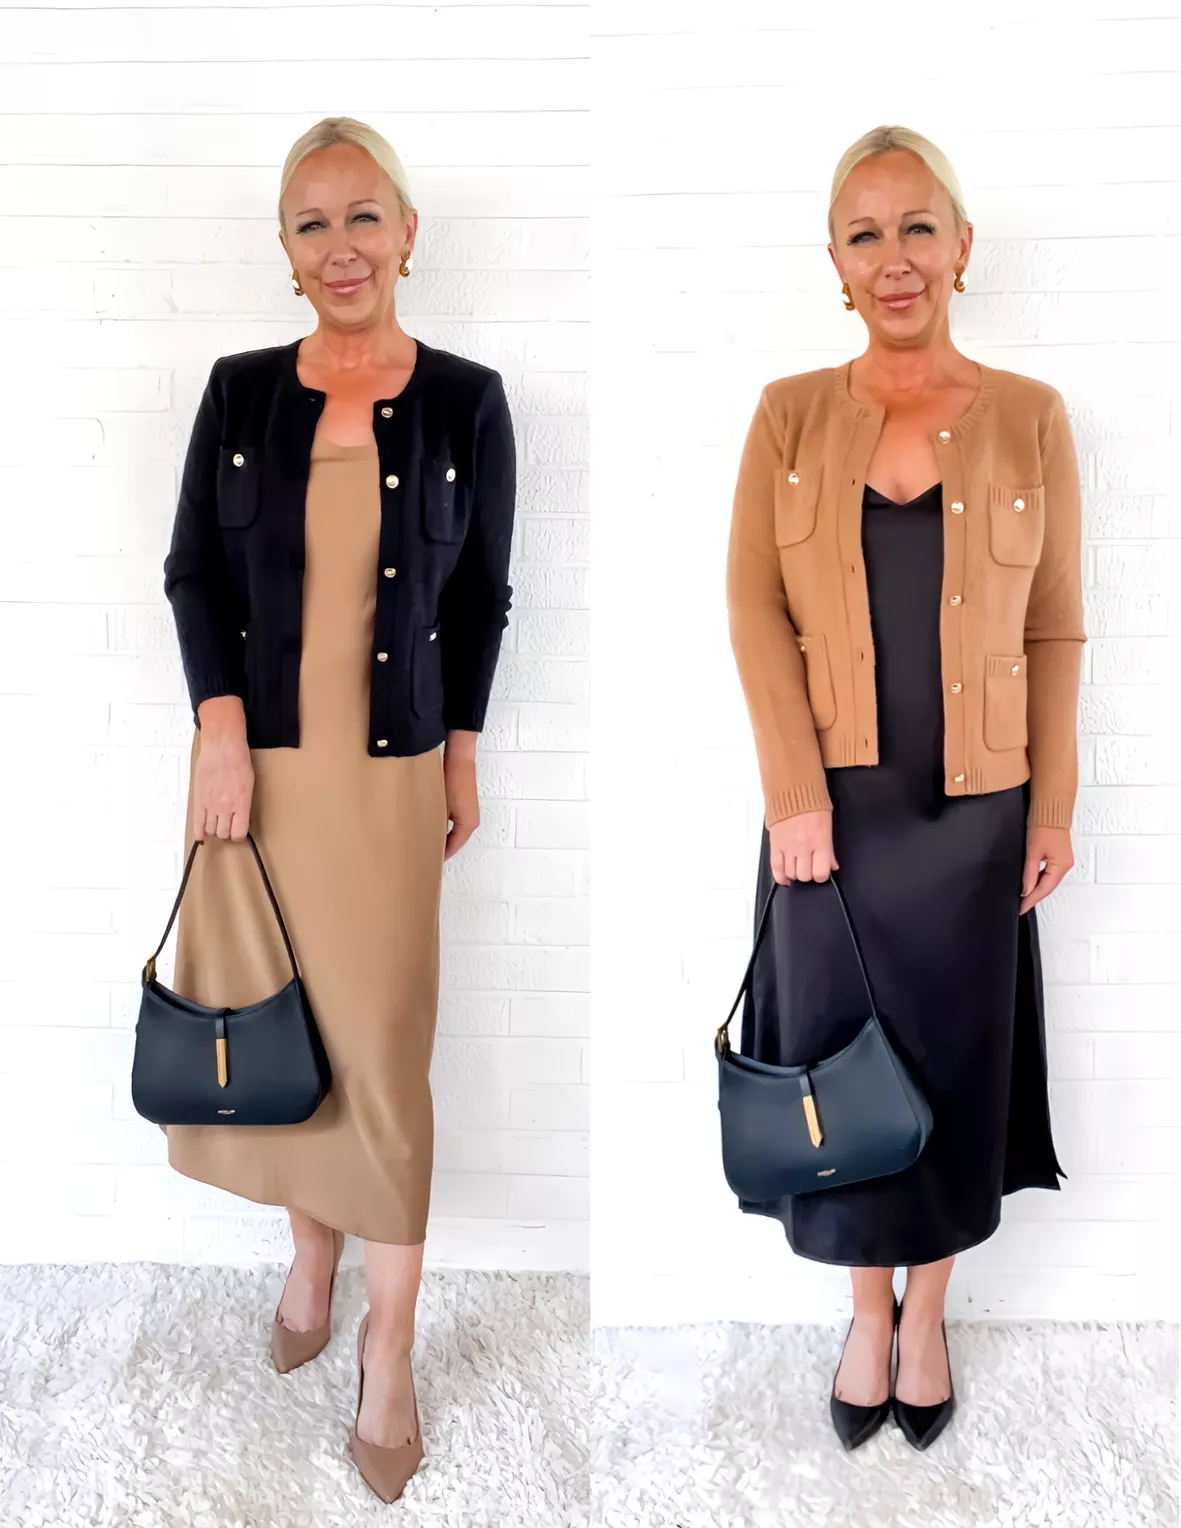 Classy Outfit for Fall, How to Dress Classy & Sophisticated for Women Over  40